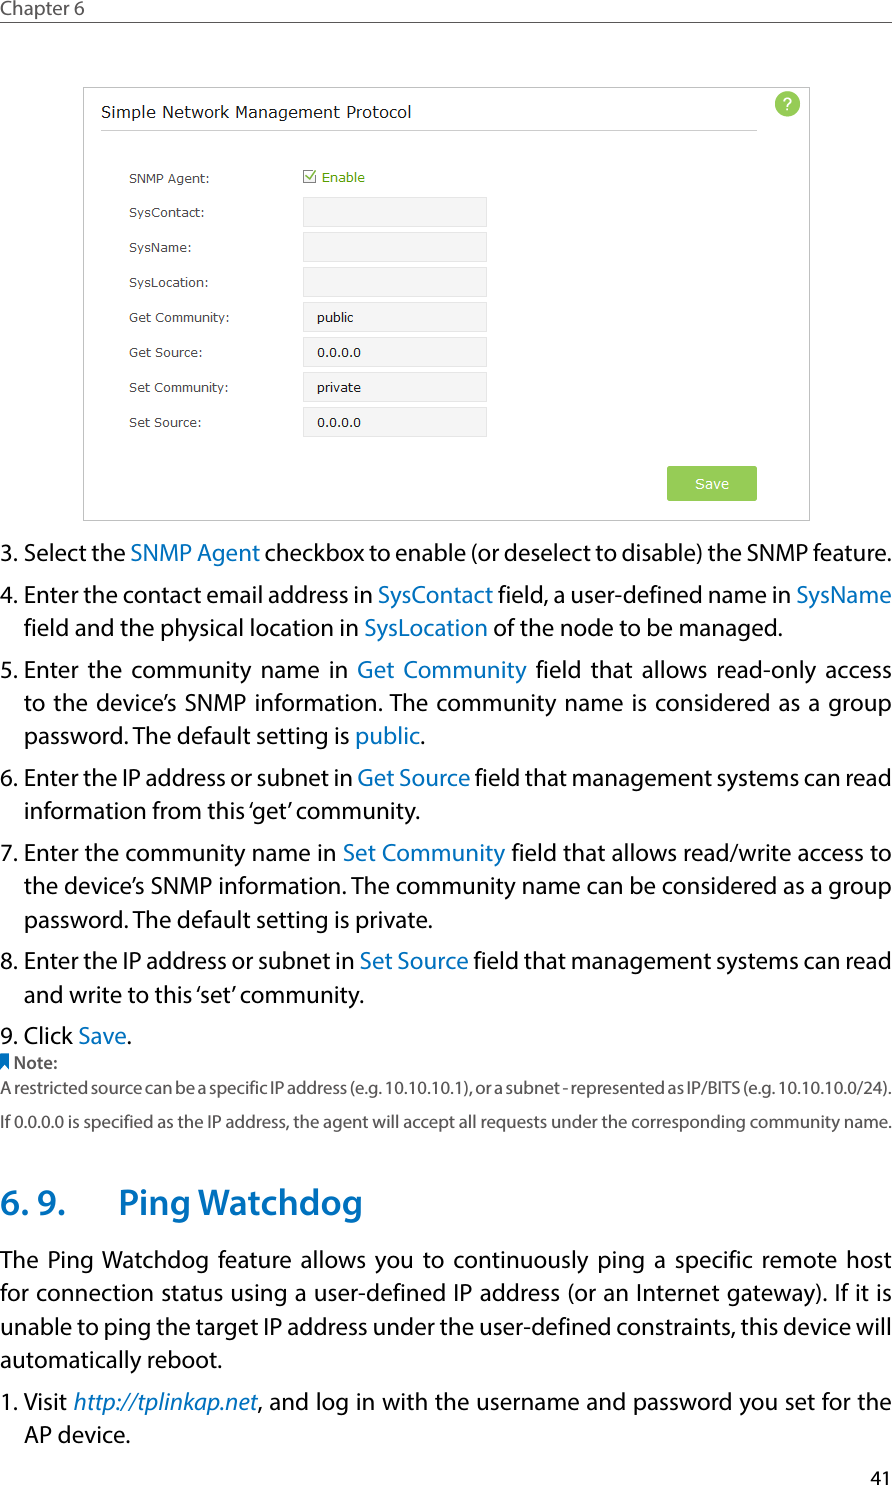 41Chapter 6  3. Select the SNMP Agent checkbox to enable (or deselect to disable) the SNMP feature.4. Enter the contact email address in SysContact field, a user-defined name in SysName field and the physical location in SysLocation of the node to be managed.5. Enter the community name in Get Community field that allows read-only access to the device’s SNMP information. The community name is considered as a group password. The default setting is public.6. Enter the IP address or subnet in Get Source field that management systems can read information from this ‘get’ community.7. Enter the community name in Set Community field that allows read/write access to the device’s SNMP information. The community name can be considered as a group password. The default setting is private.8. Enter the IP address or subnet in Set Source field that management systems can read and write to this ‘set’ community.9. Click Save.Note: A restricted source can be a specific IP address (e.g. 10.10.10.1), or a subnet - represented as IP/BITS (e.g. 10.10.10.0/24). If 0.0.0.0 is specified as the IP address, the agent will accept all requests under the corresponding community name.6. 9.  Ping WatchdogThe Ping Watchdog feature allows you to continuously ping a specific remote host for connection status using a user-defined IP address (or an Internet gateway). If it is unable to ping the target IP address under the user-defined constraints, this device will automatically reboot.1. Visit http://tplinkap.net, and log in with the username and password you set for the AP device.